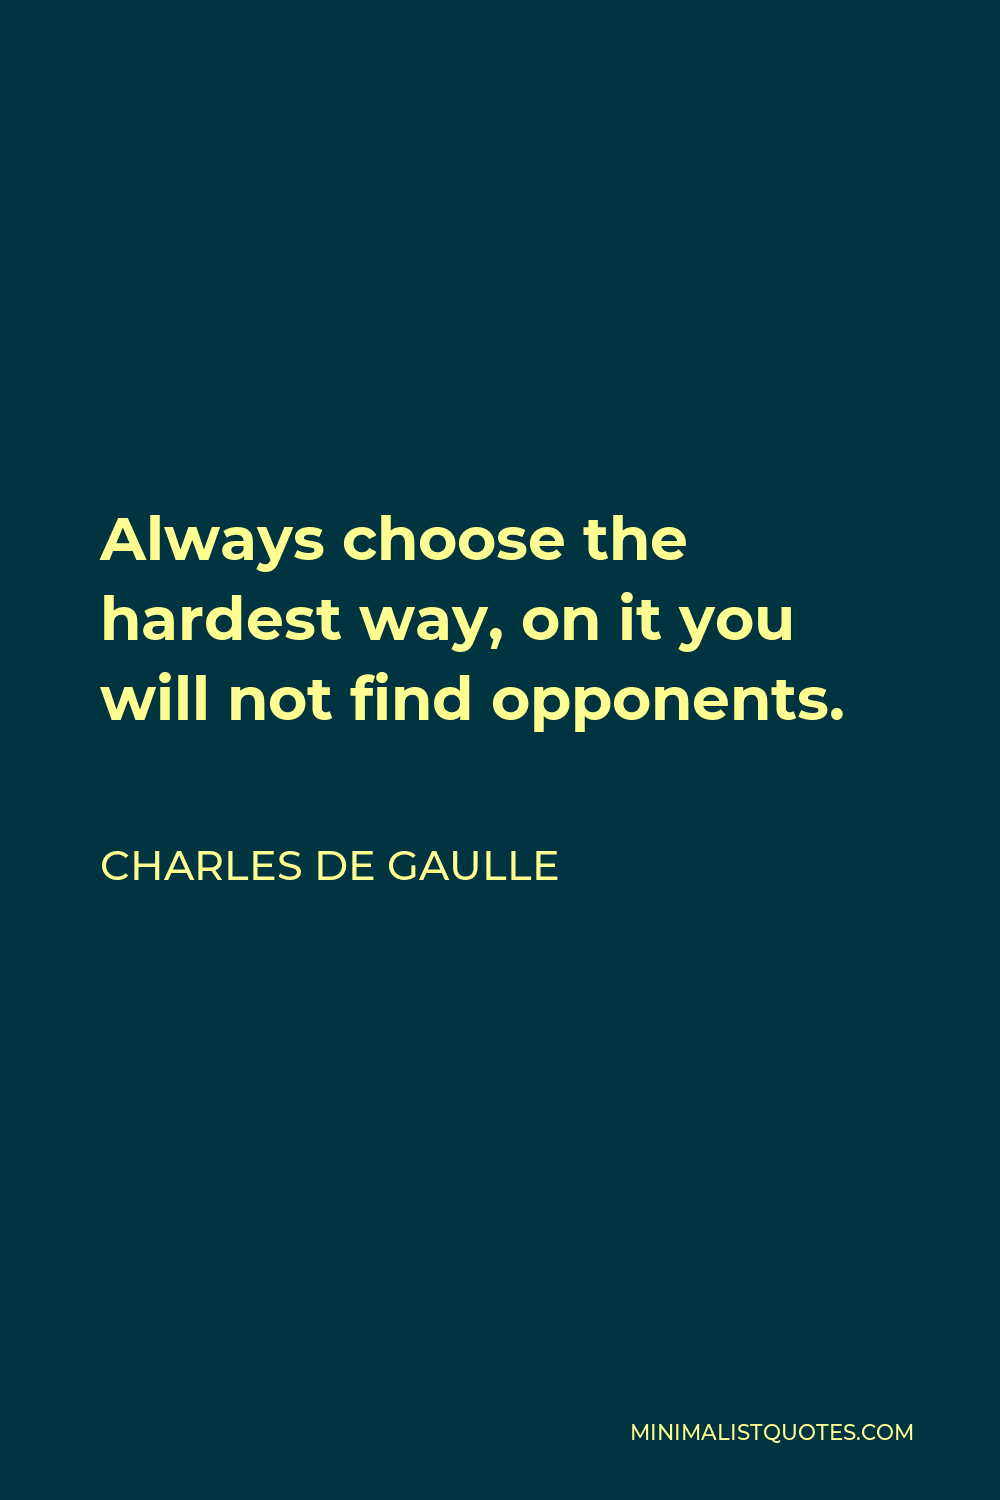 Charles de Gaulle Quote - Always choose the hardest way, on it you will not find opponents.